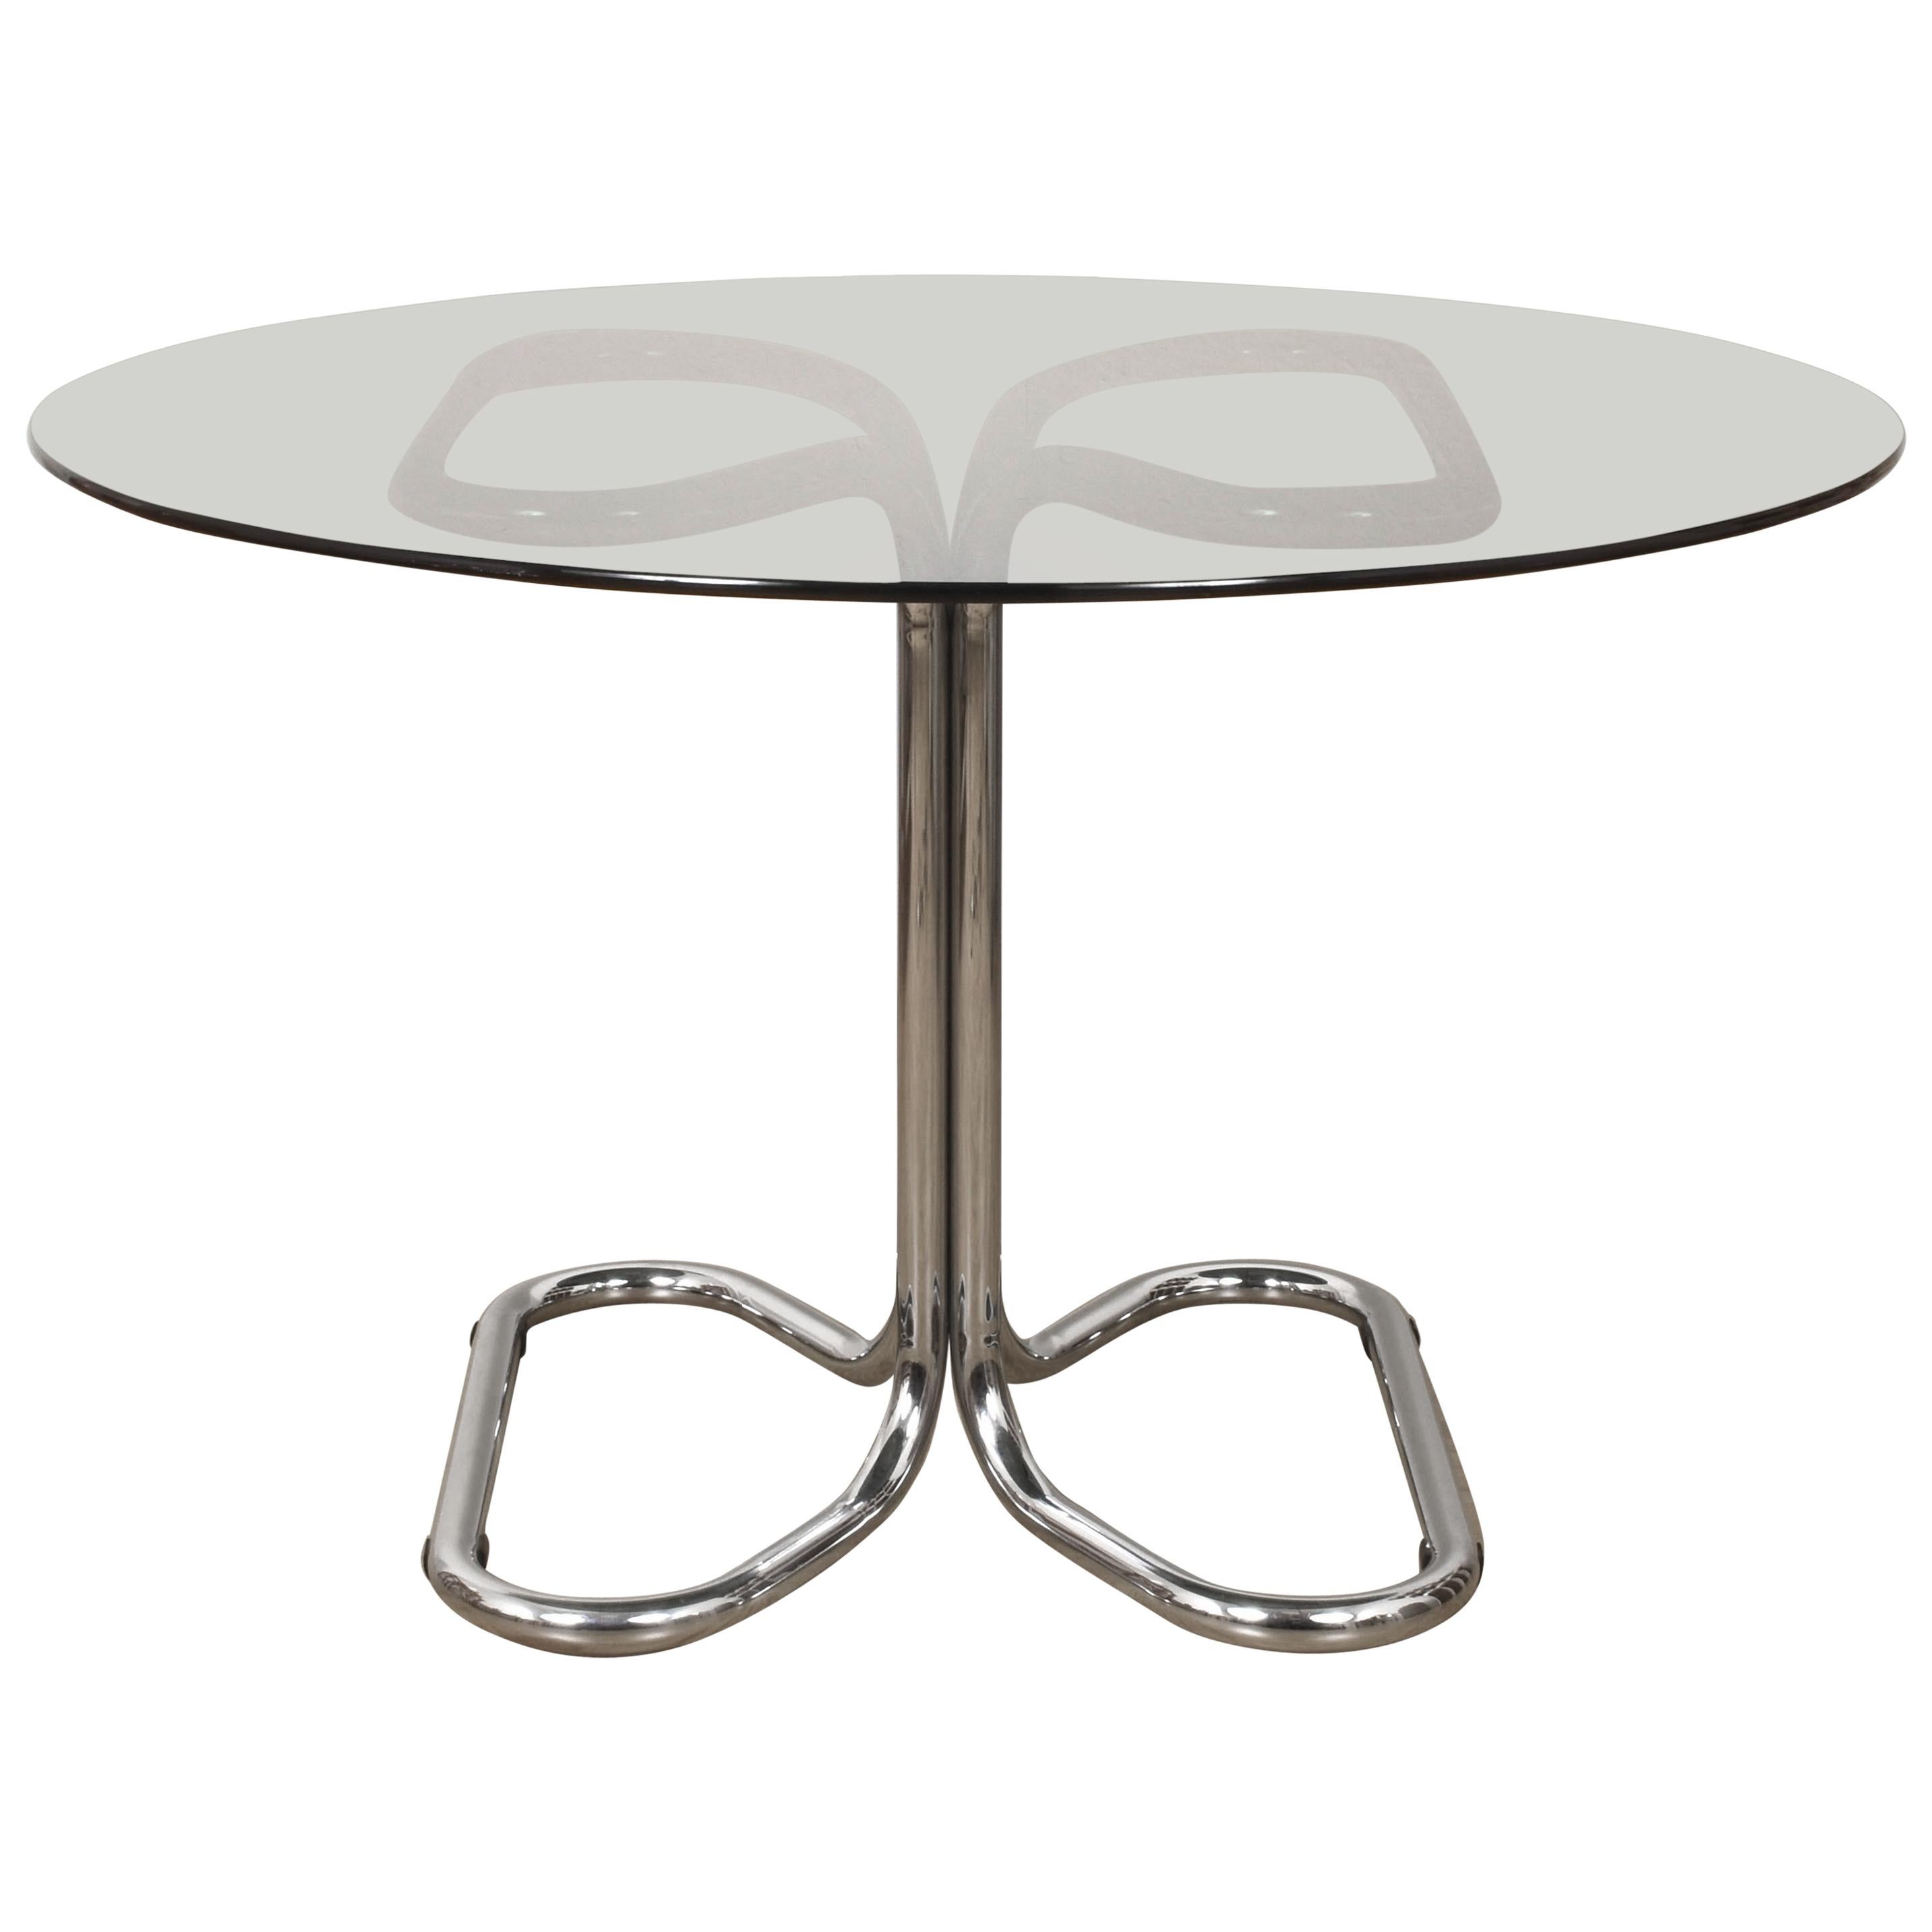 Italian Chrome Base Smoked Glass Top Dining Table, Giotto Stoppino, Italy, 1970s